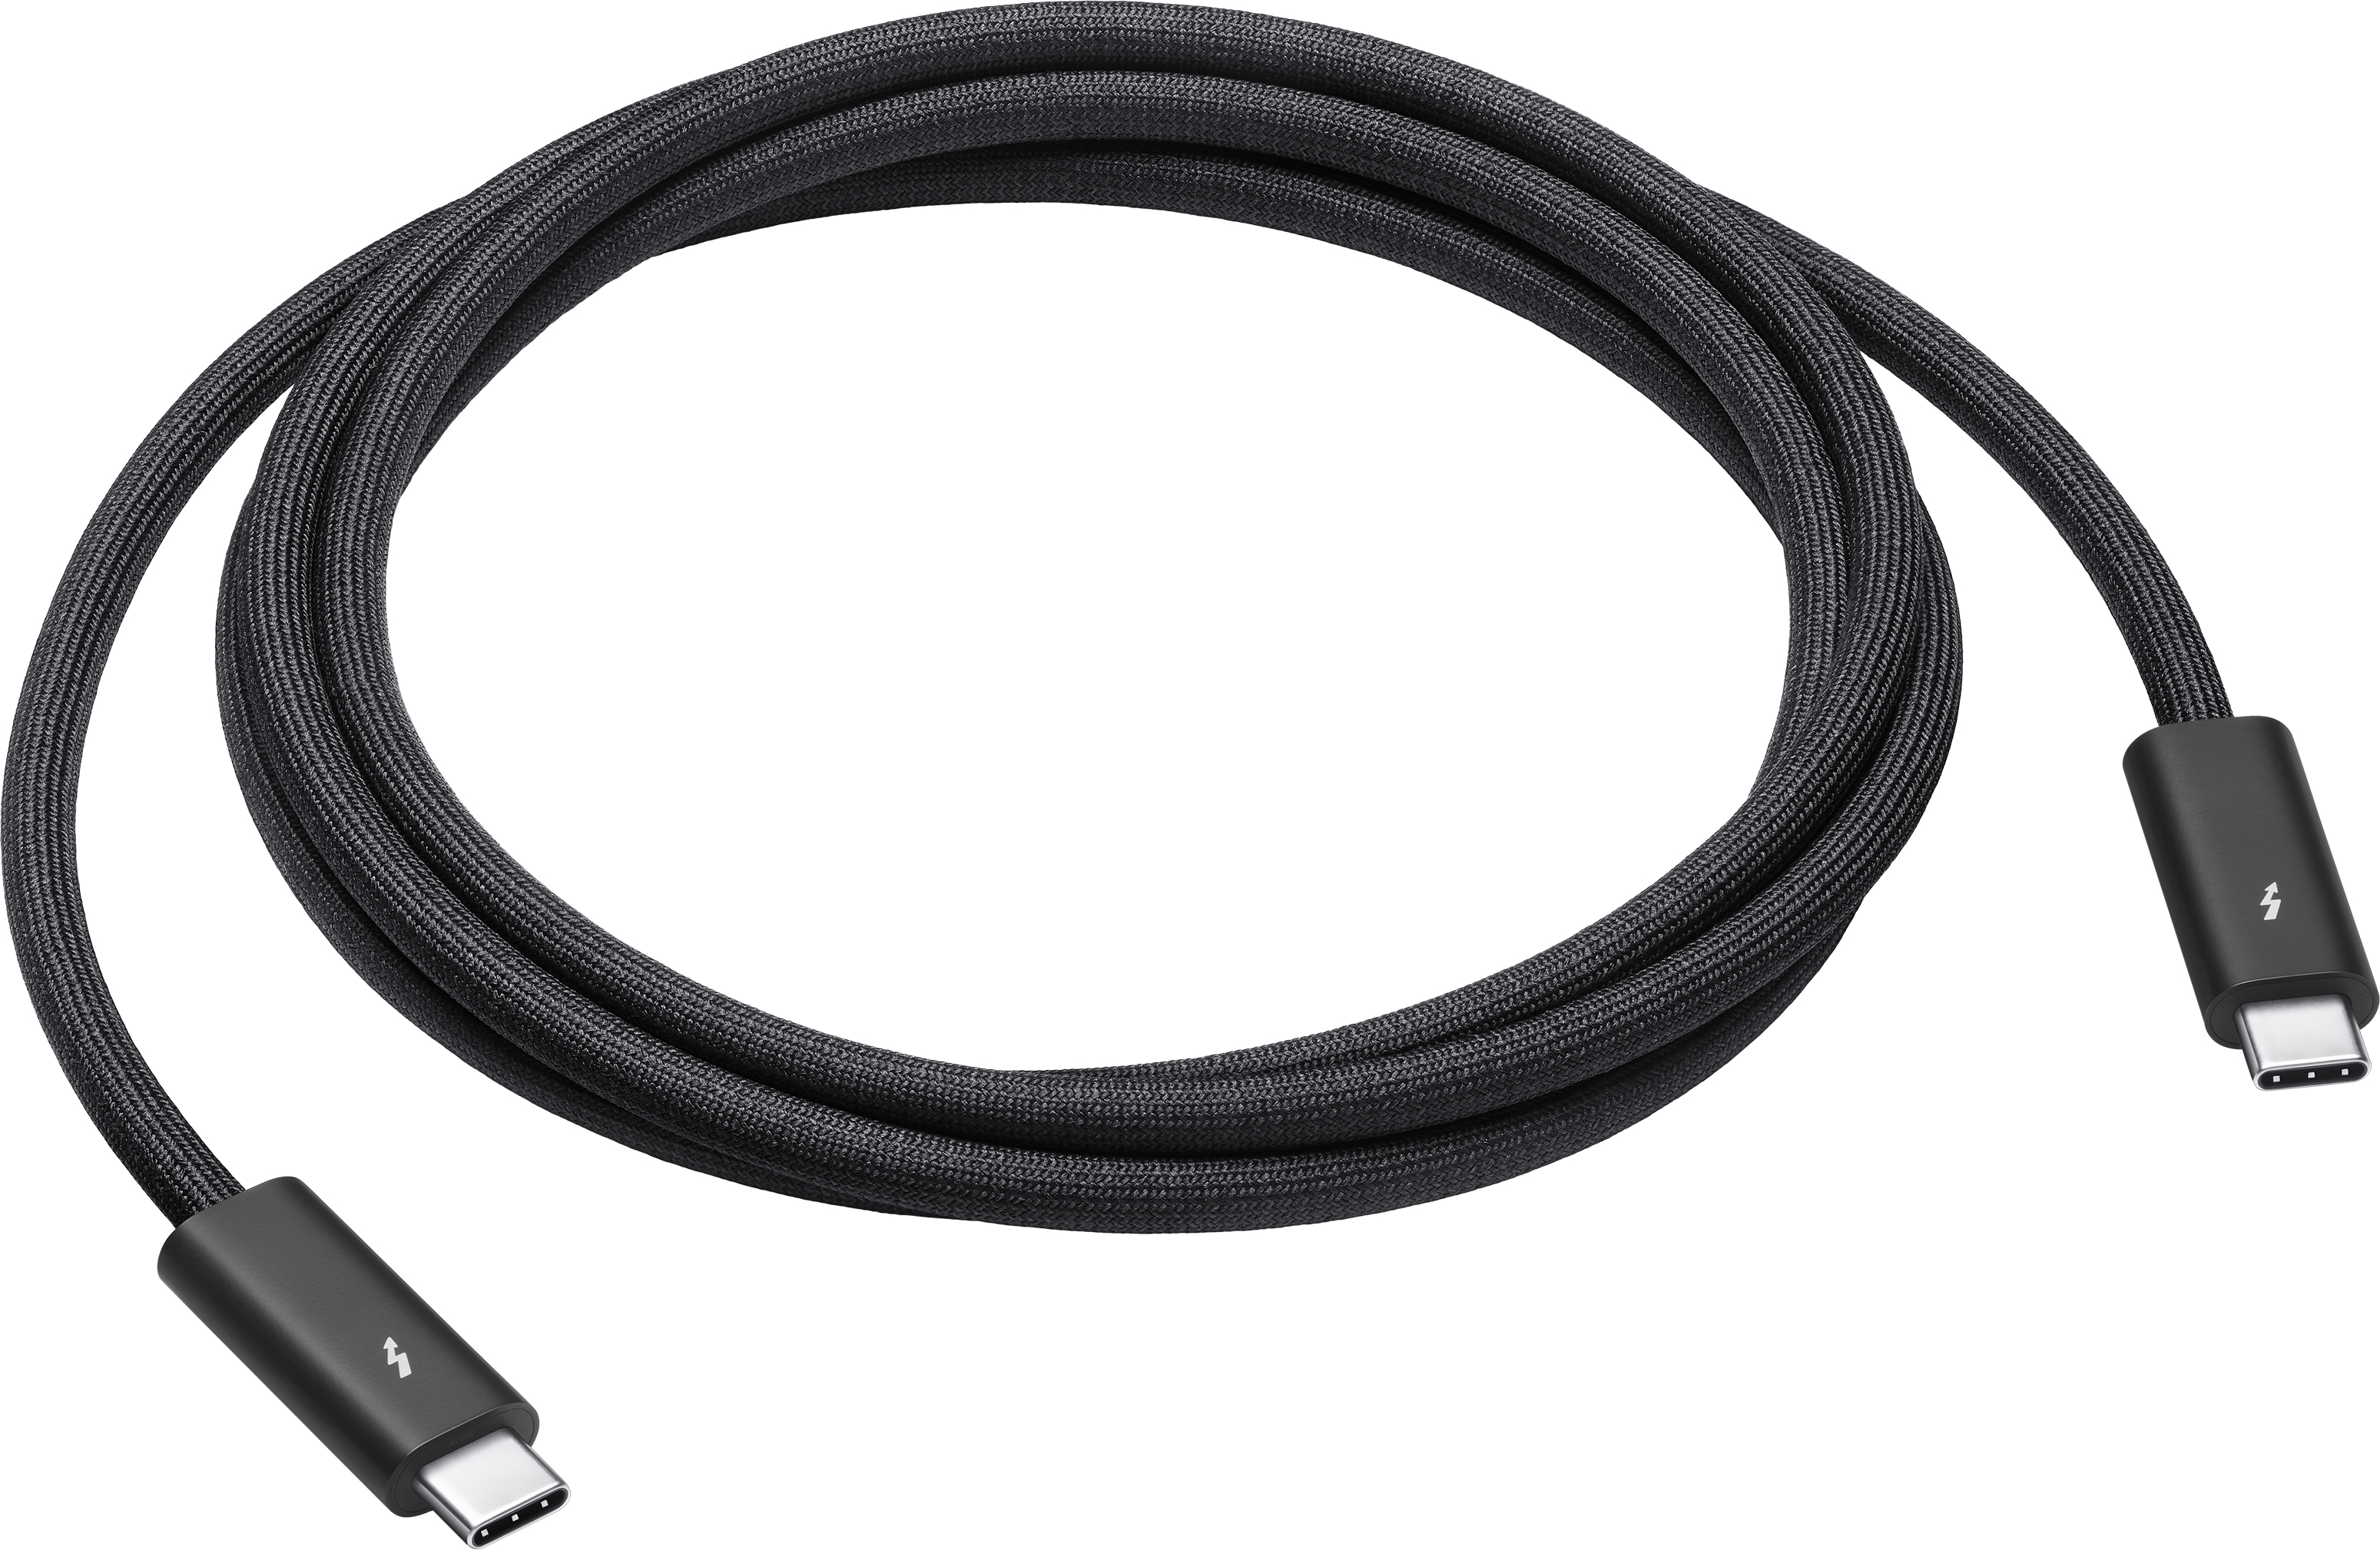 Apple - Cpu Accessories          Thunderbolt 4 Pro Cable (1.8 M)     .                                   Mn713zm/a